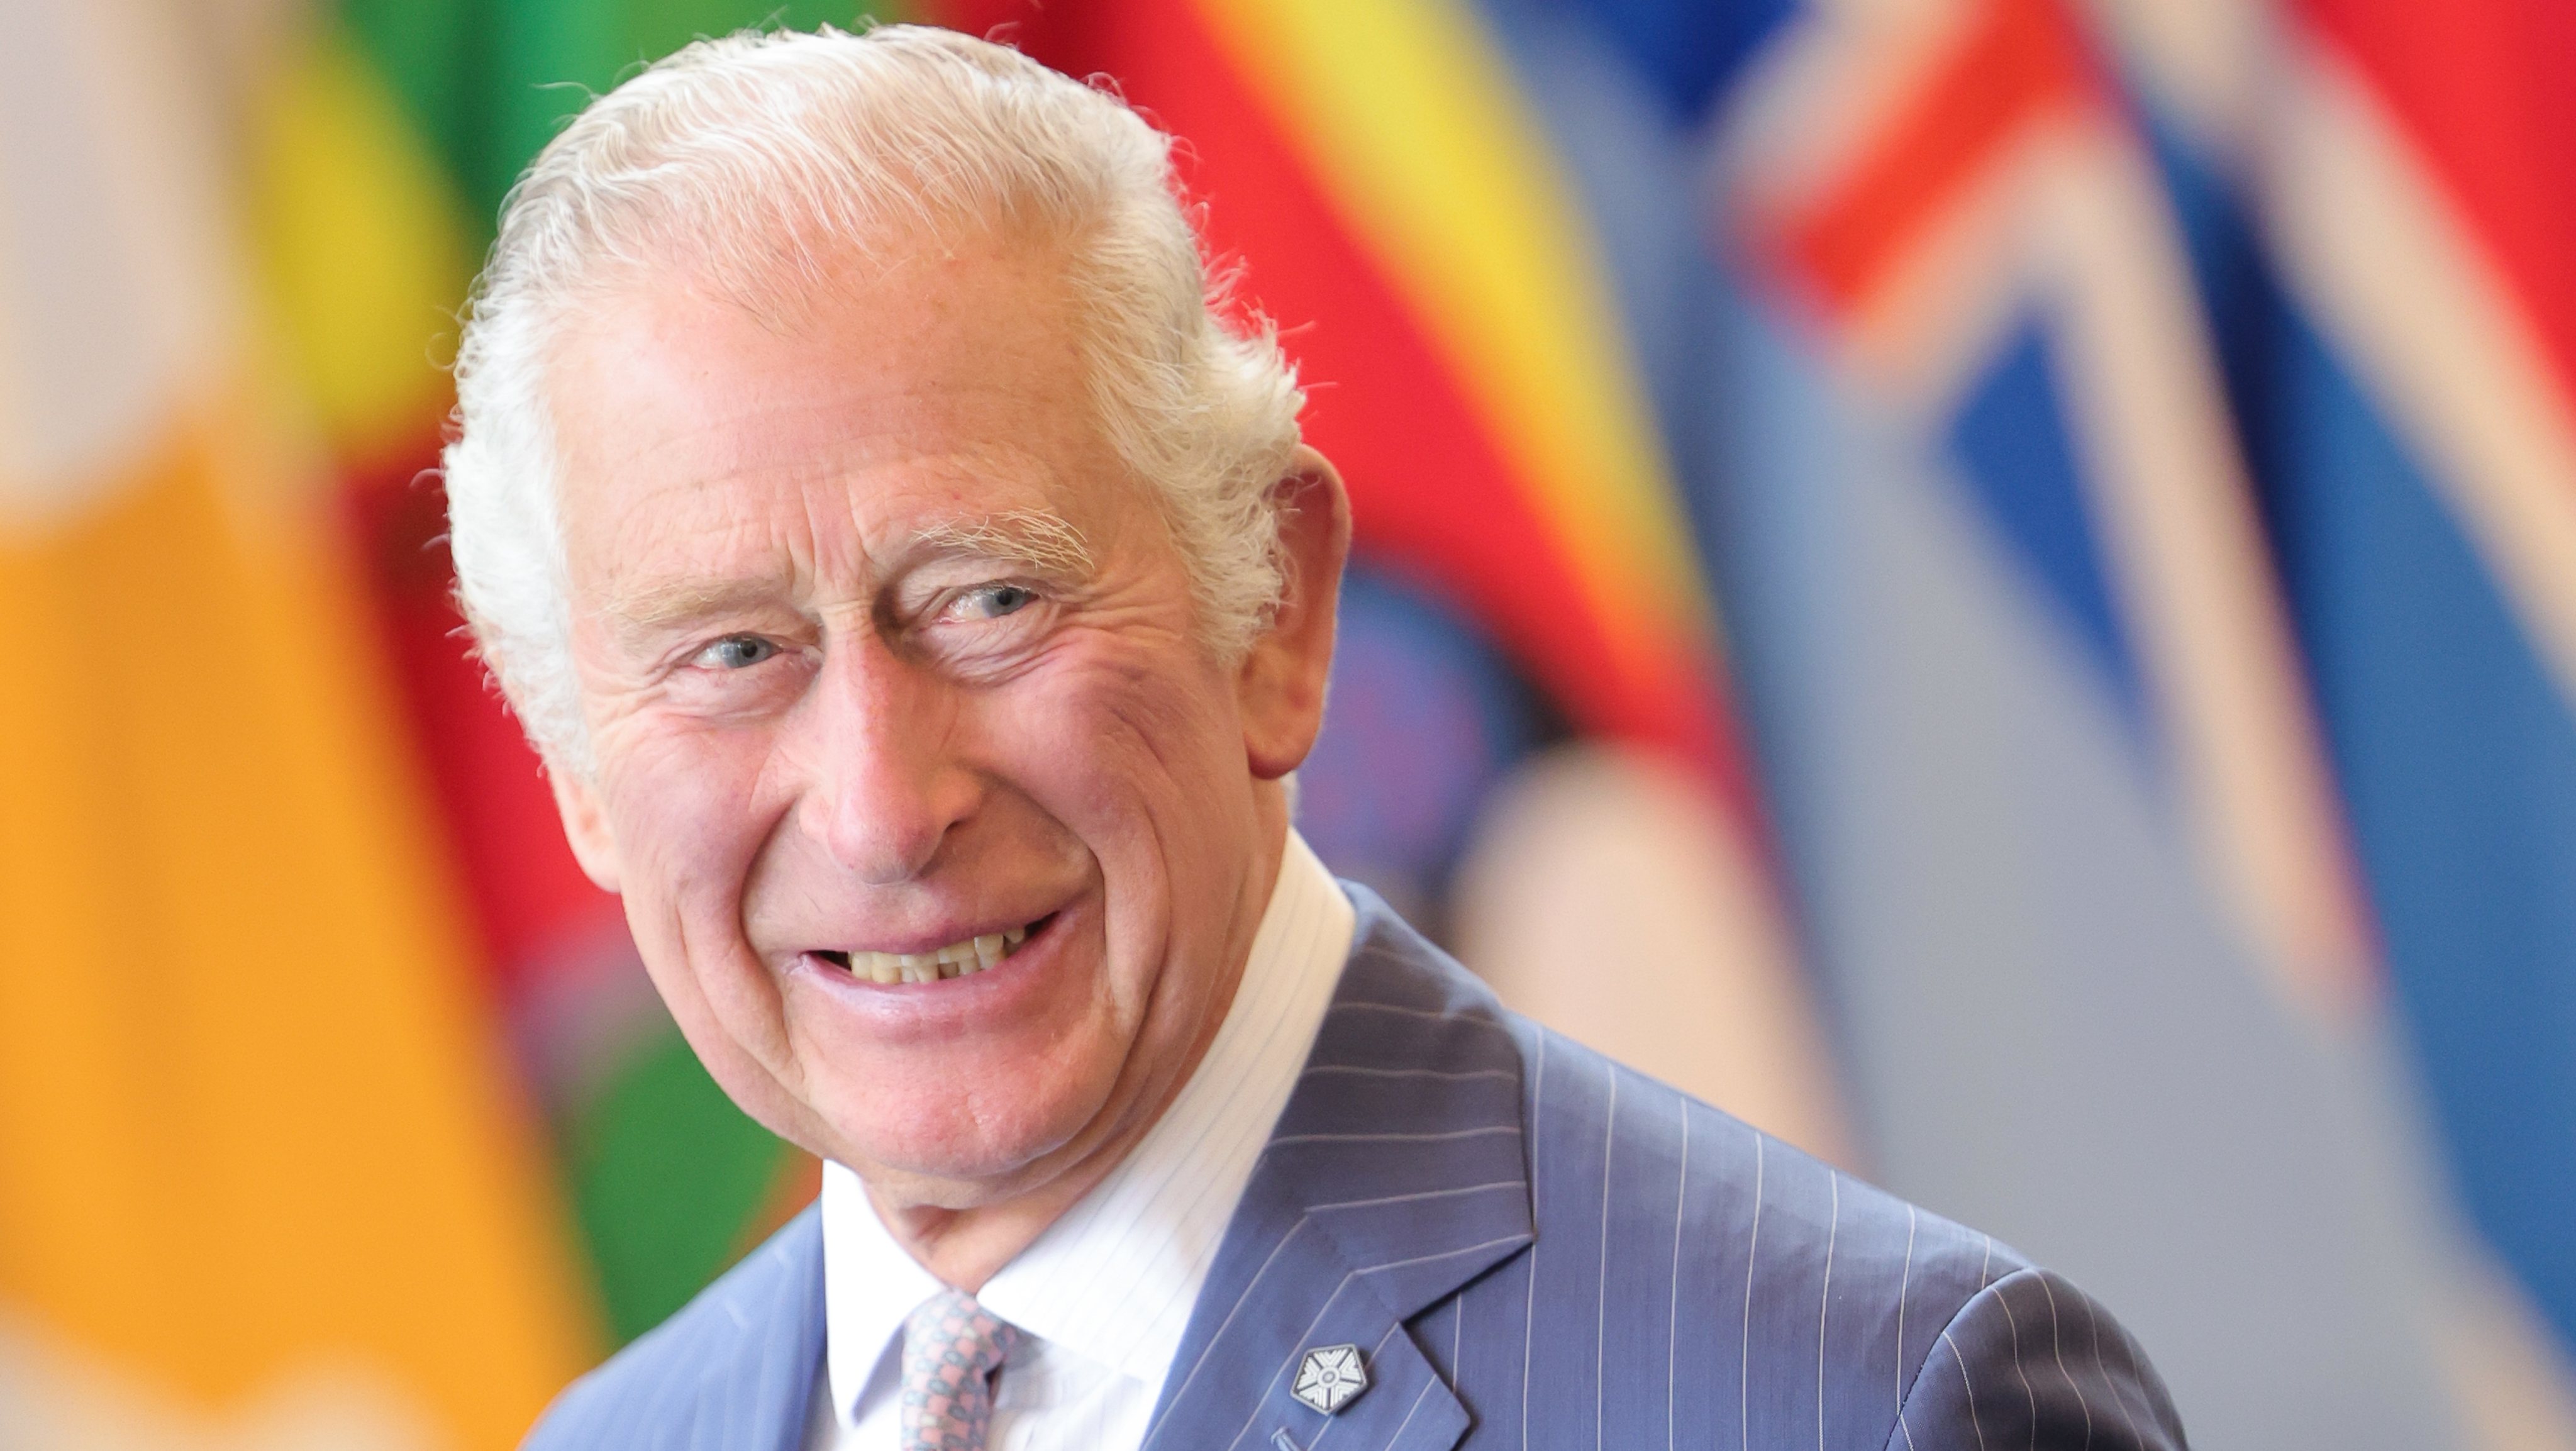 The Prince of Wales And Duchess Of Cornwall Attend Day Five of The Commonwealth Heads Of Government Meeting